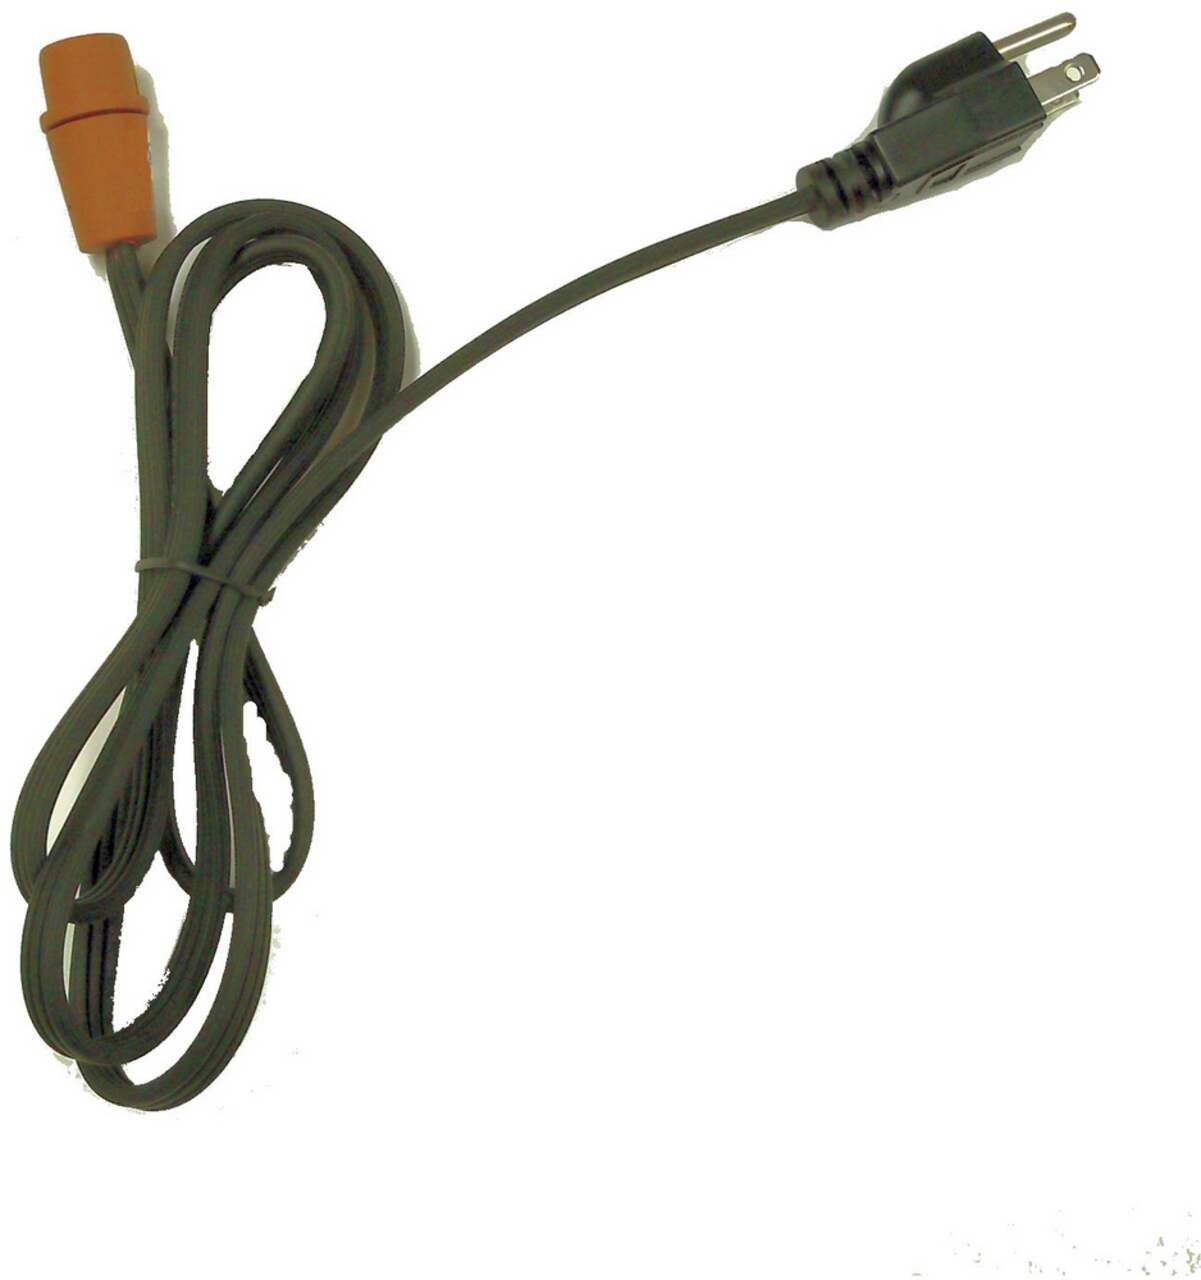 Zerostart Replacement Cord with Threaded Nut, 5-ft